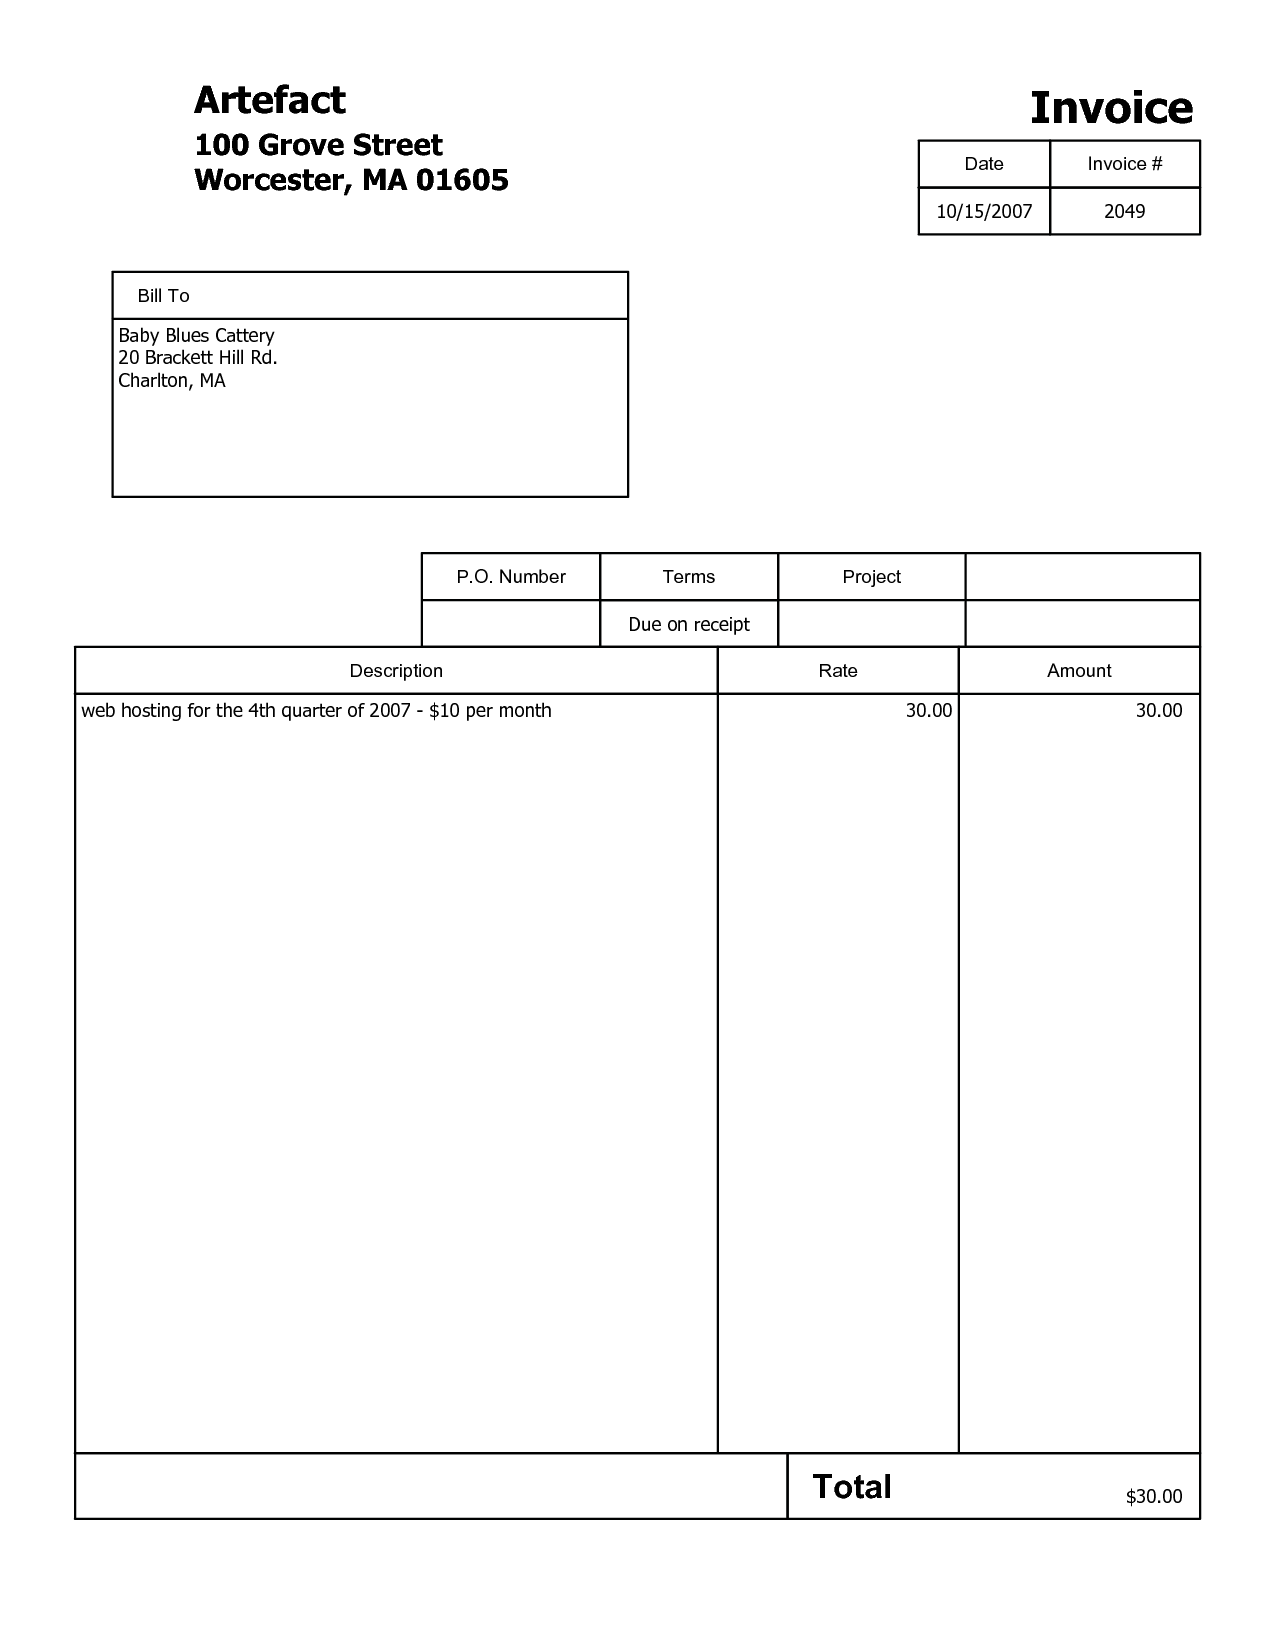 Fillable Invoice Fill Online, Printable, Fillable, Blank | PDFfiller